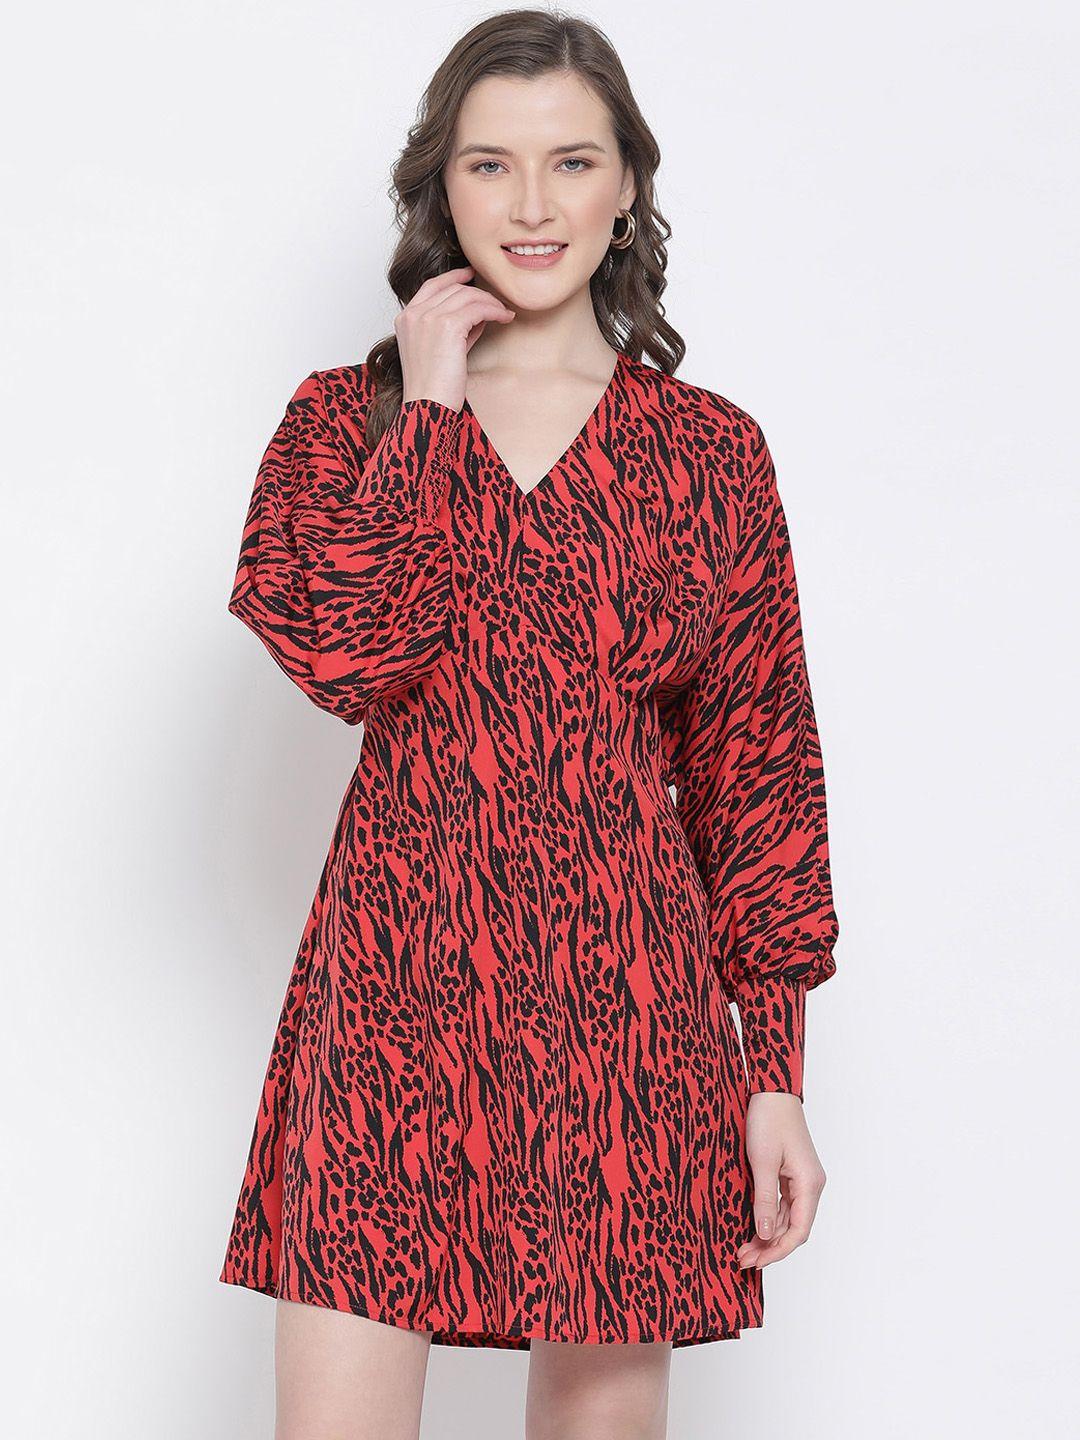 oxolloxo-women-red-&-black-animal-printed-fit-&-flare-dress